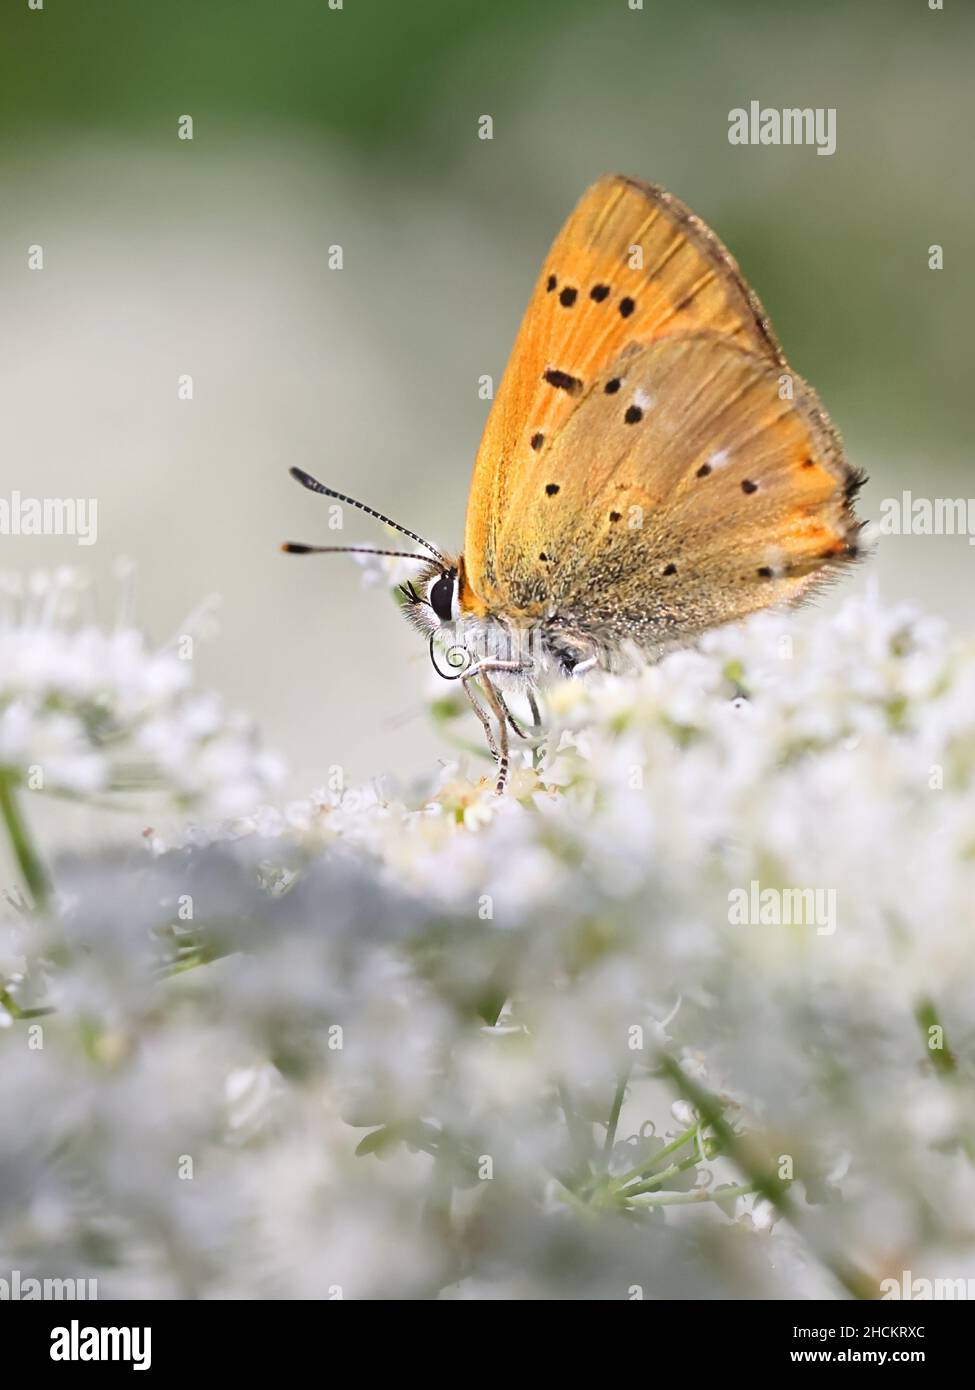 Lycaena virgaureae, known as Scarce copper butterfly, feeding on Cow Parsley, Anthriscus sylvestris Stock Photo